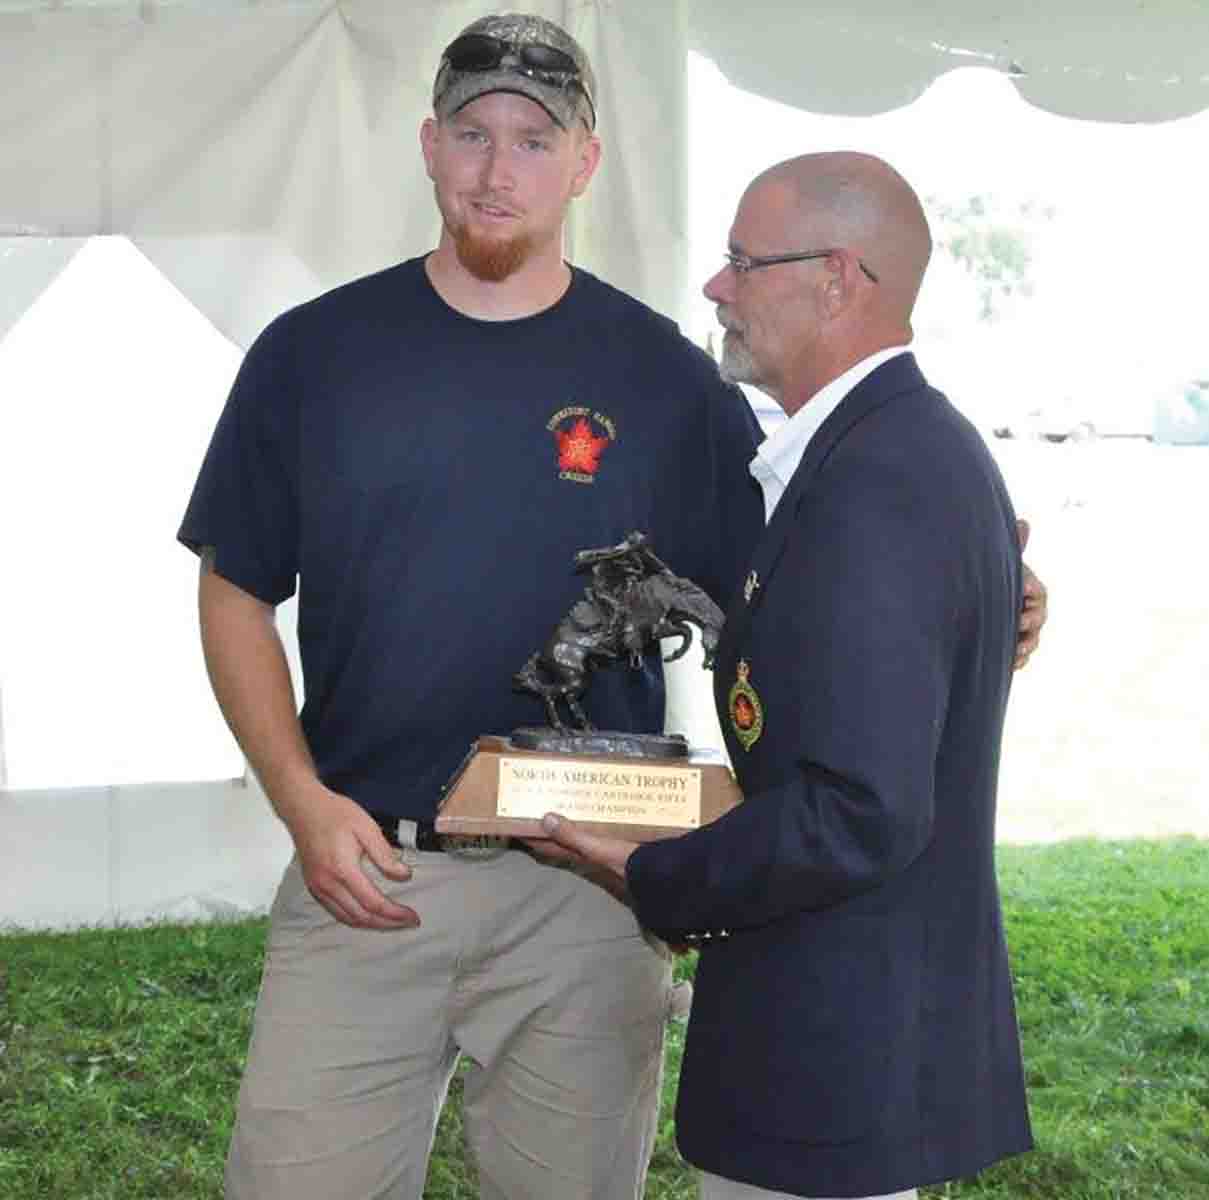 In the photo, Cody Hicks is presented with the North American Trophy for his great effort in winning the Grand Aggregate in Cartridge Rifle Class, by my predecessor and past Black Powder Program Director, Chris Jones.